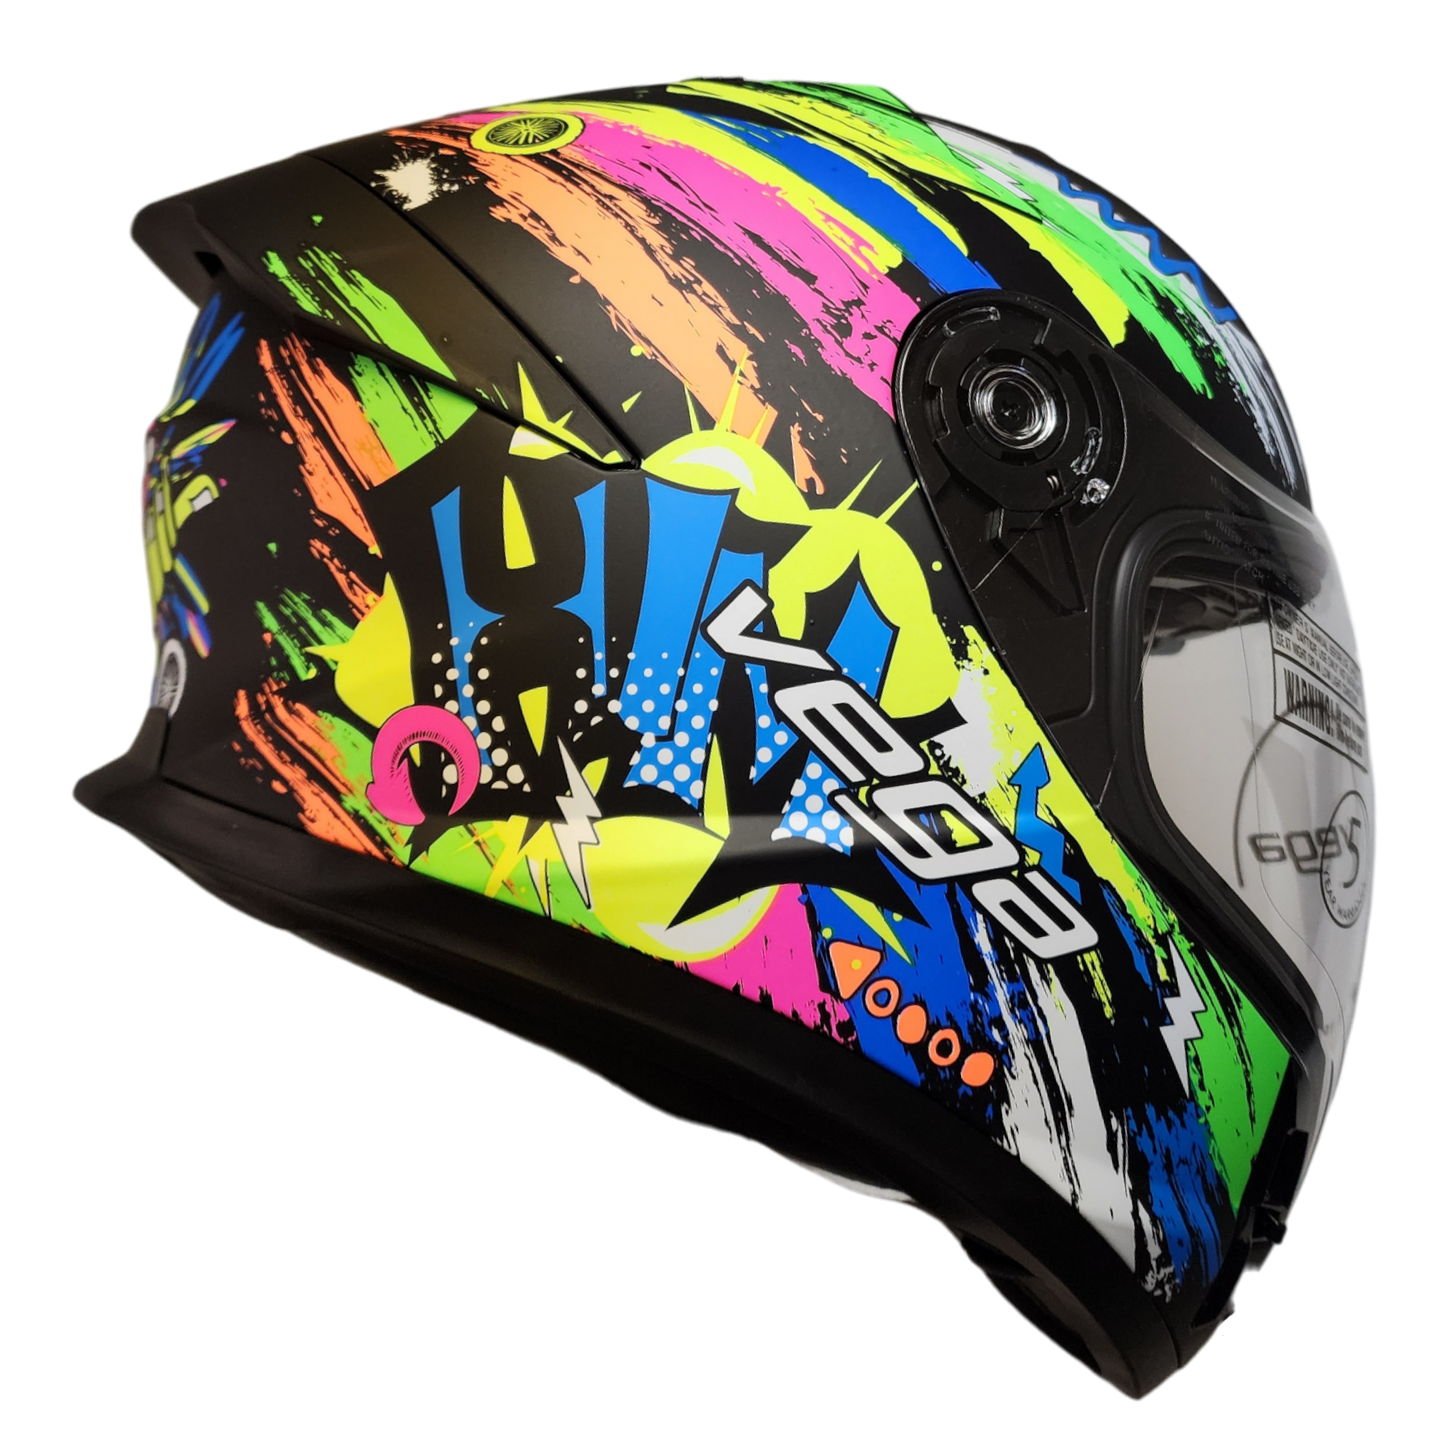 Vega AIR GPX Motorcycle Helmet - Ripper with Smoke tinted outer shield